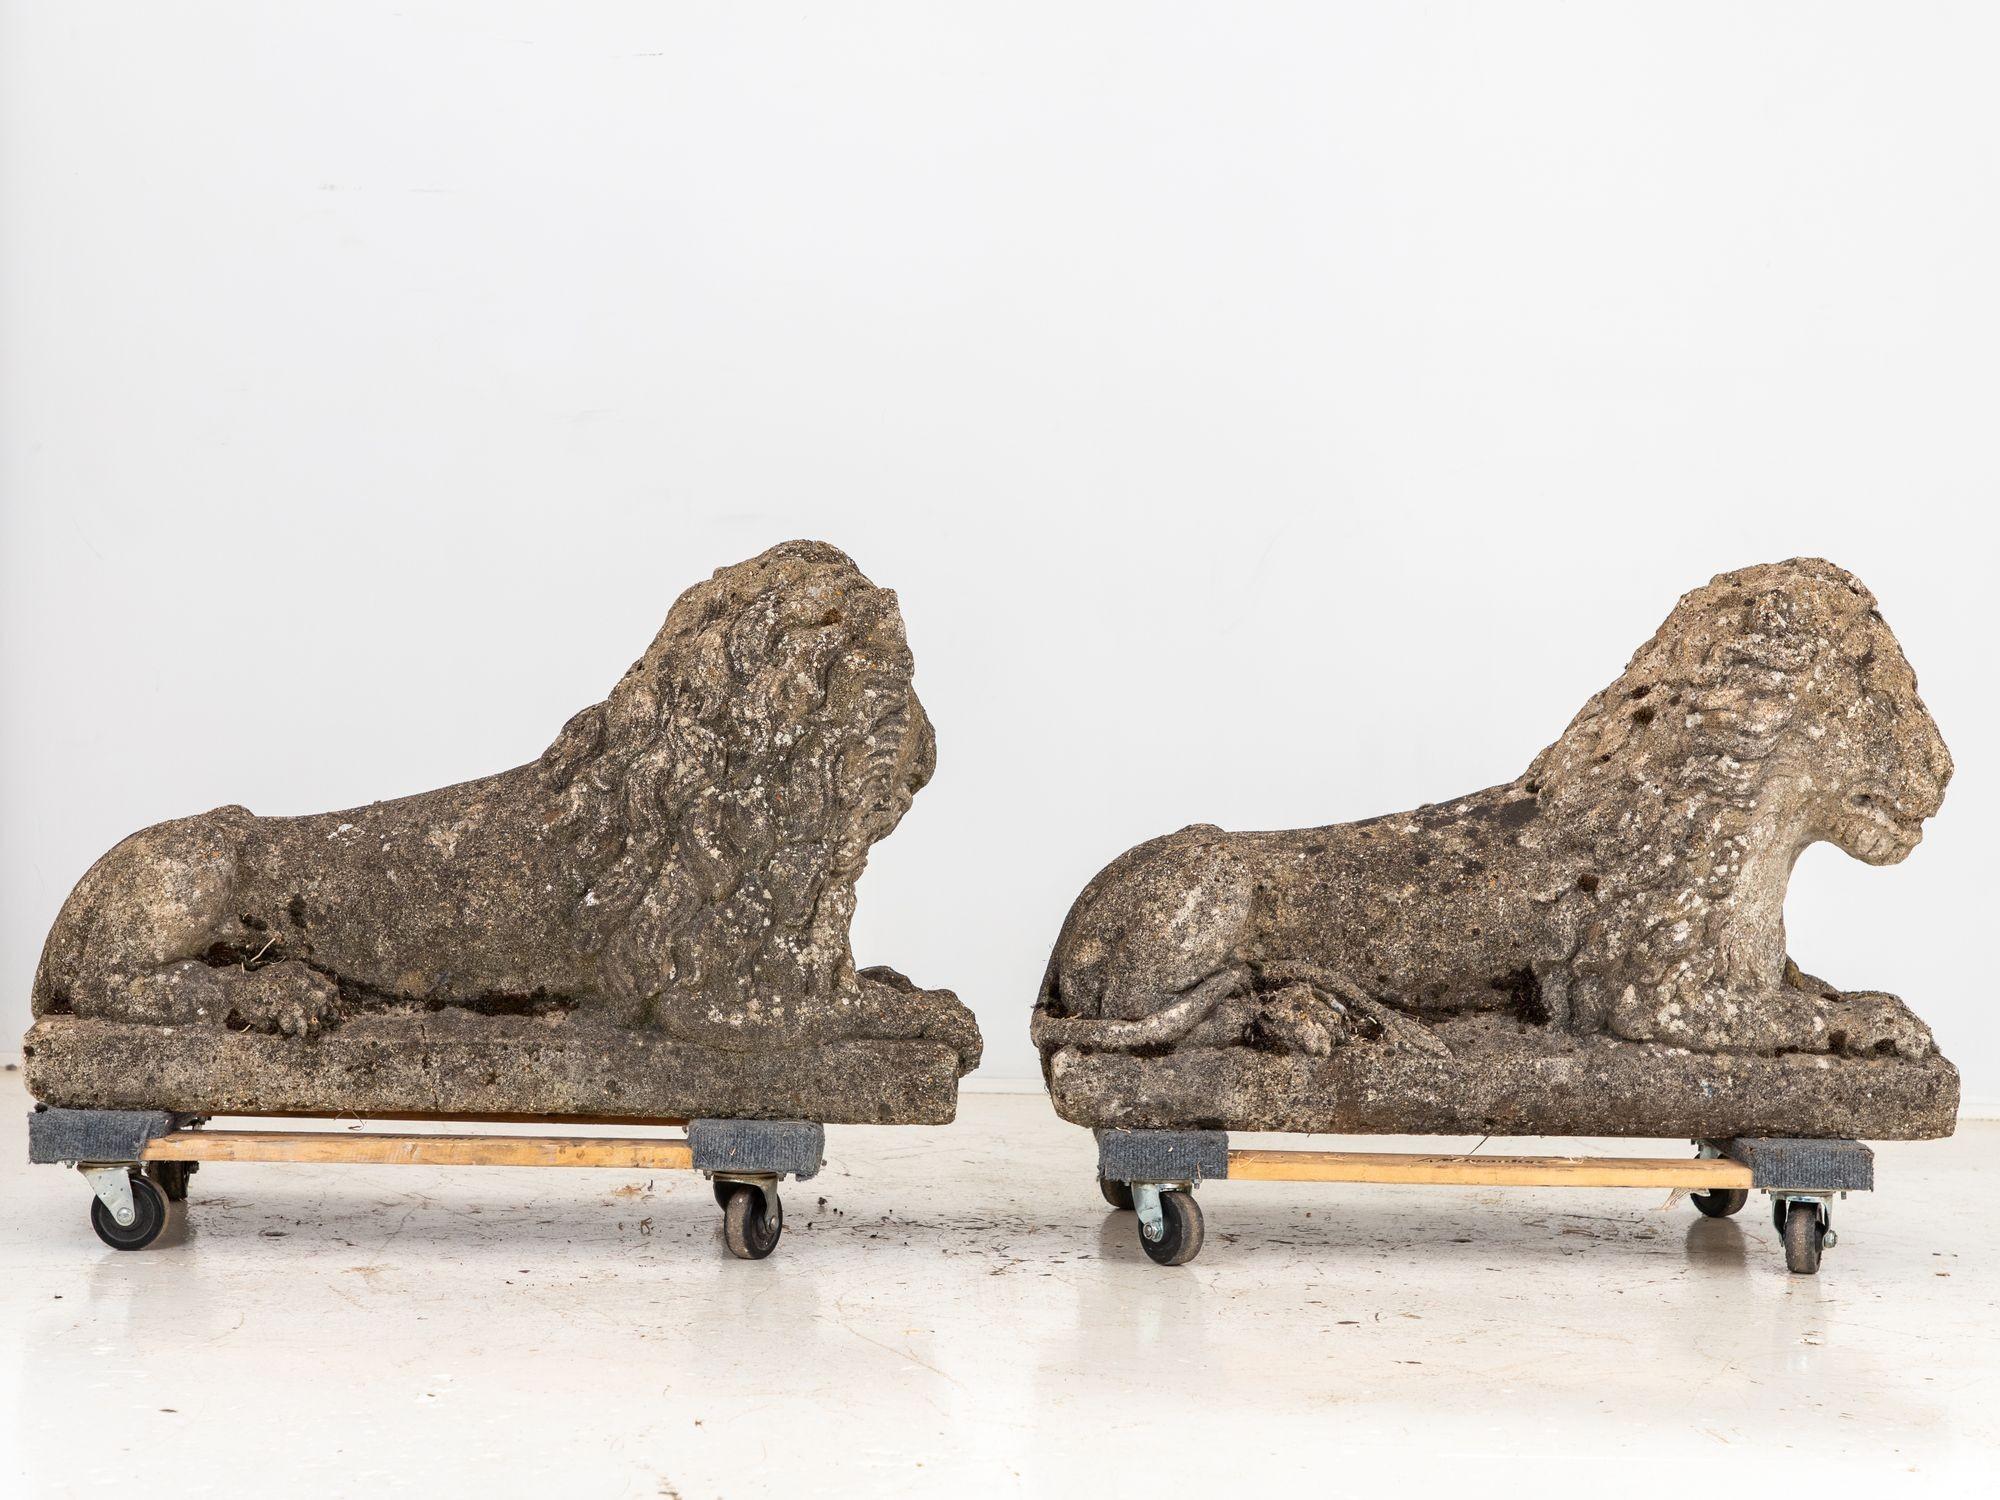 Early 20th Century Circa 1920 English Pair of Large Recumbent Concrete Lions For Sale